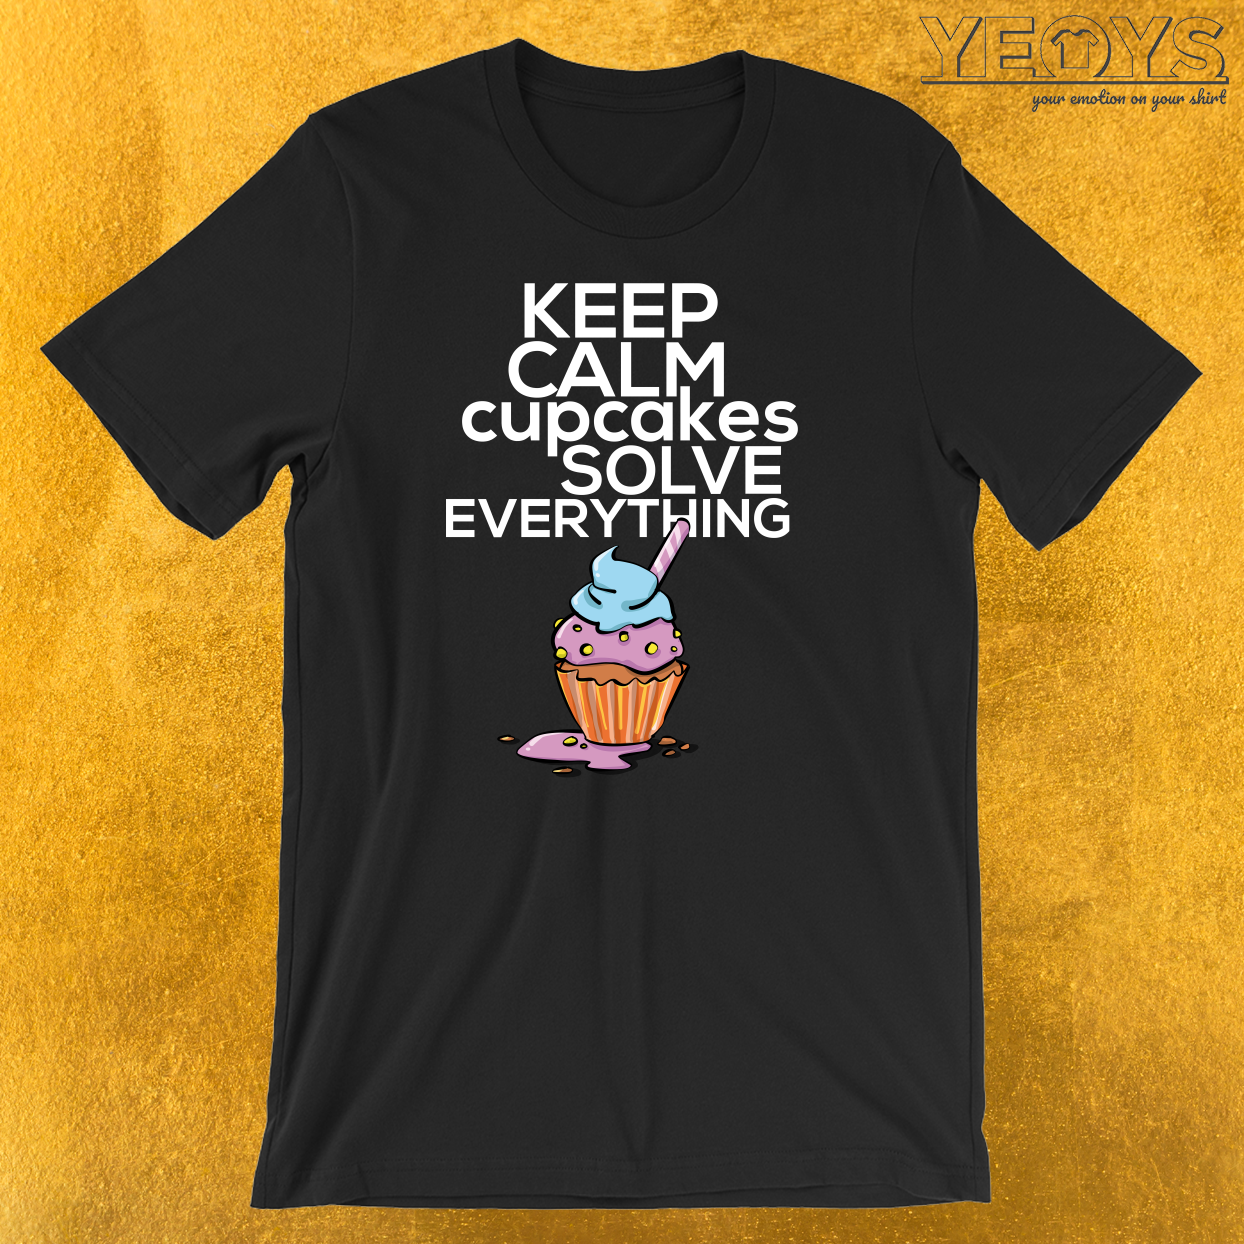 Keep Calm Cupcakes Solve Everything T-Shirt